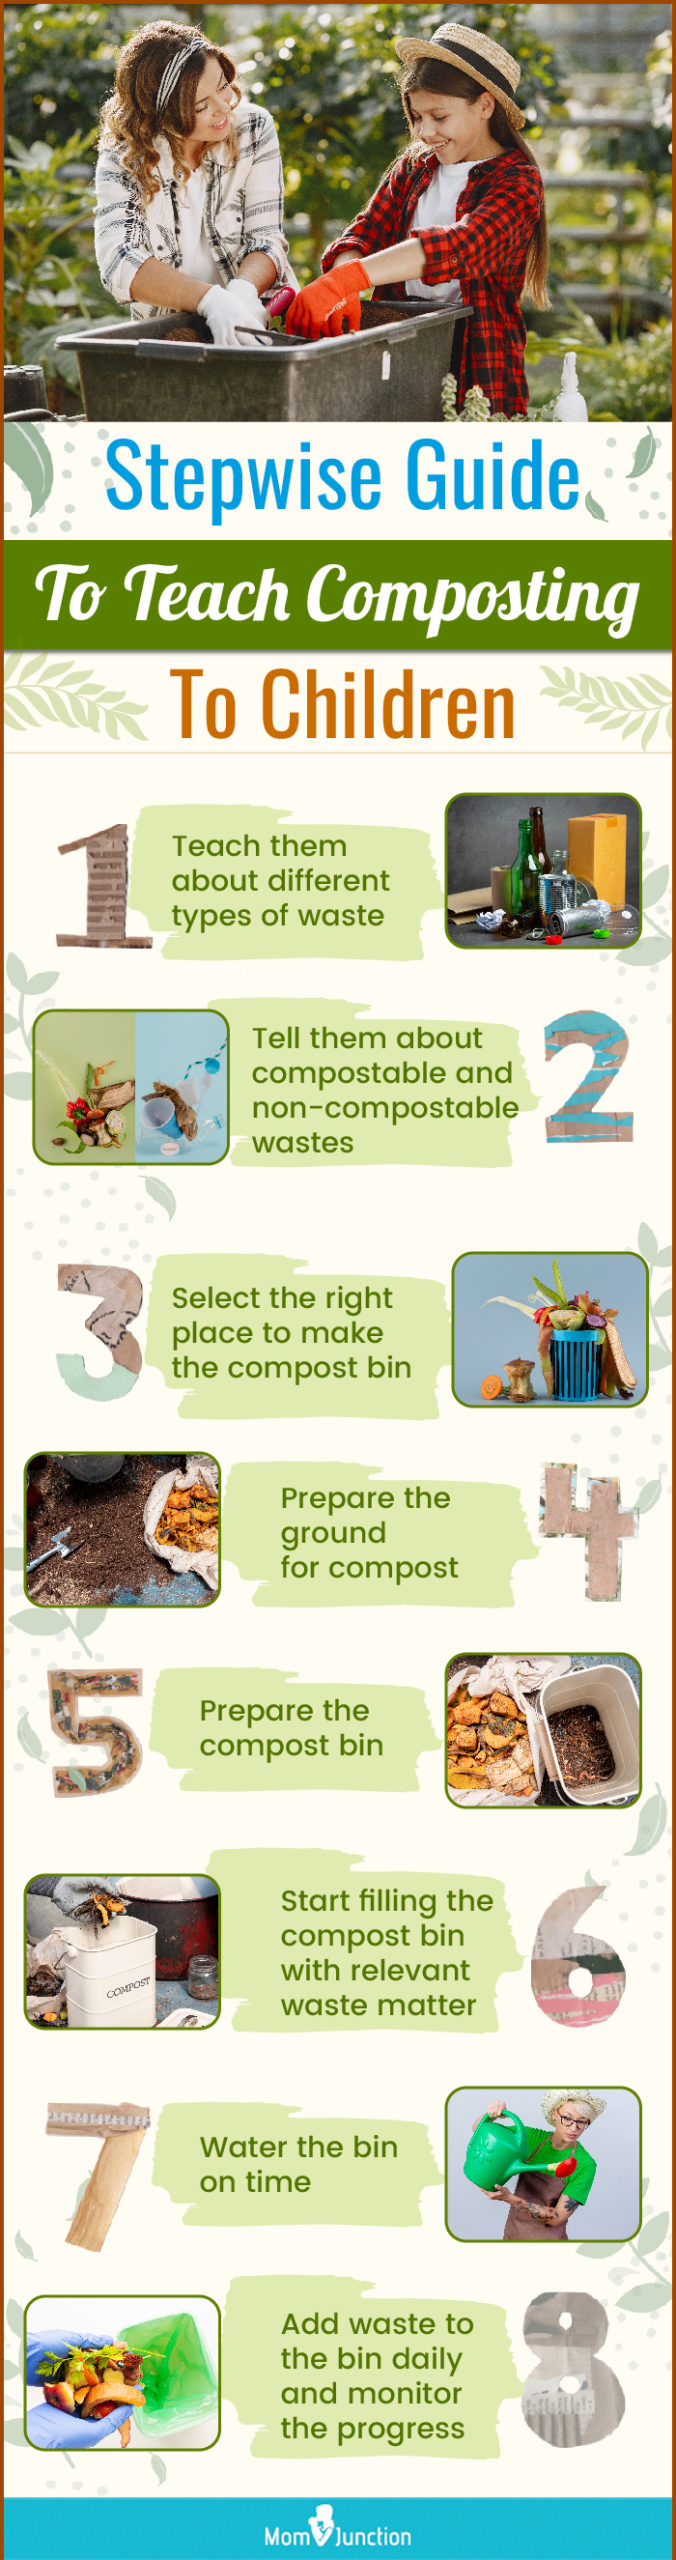 stepwise guide to teach composting to children (infographic)